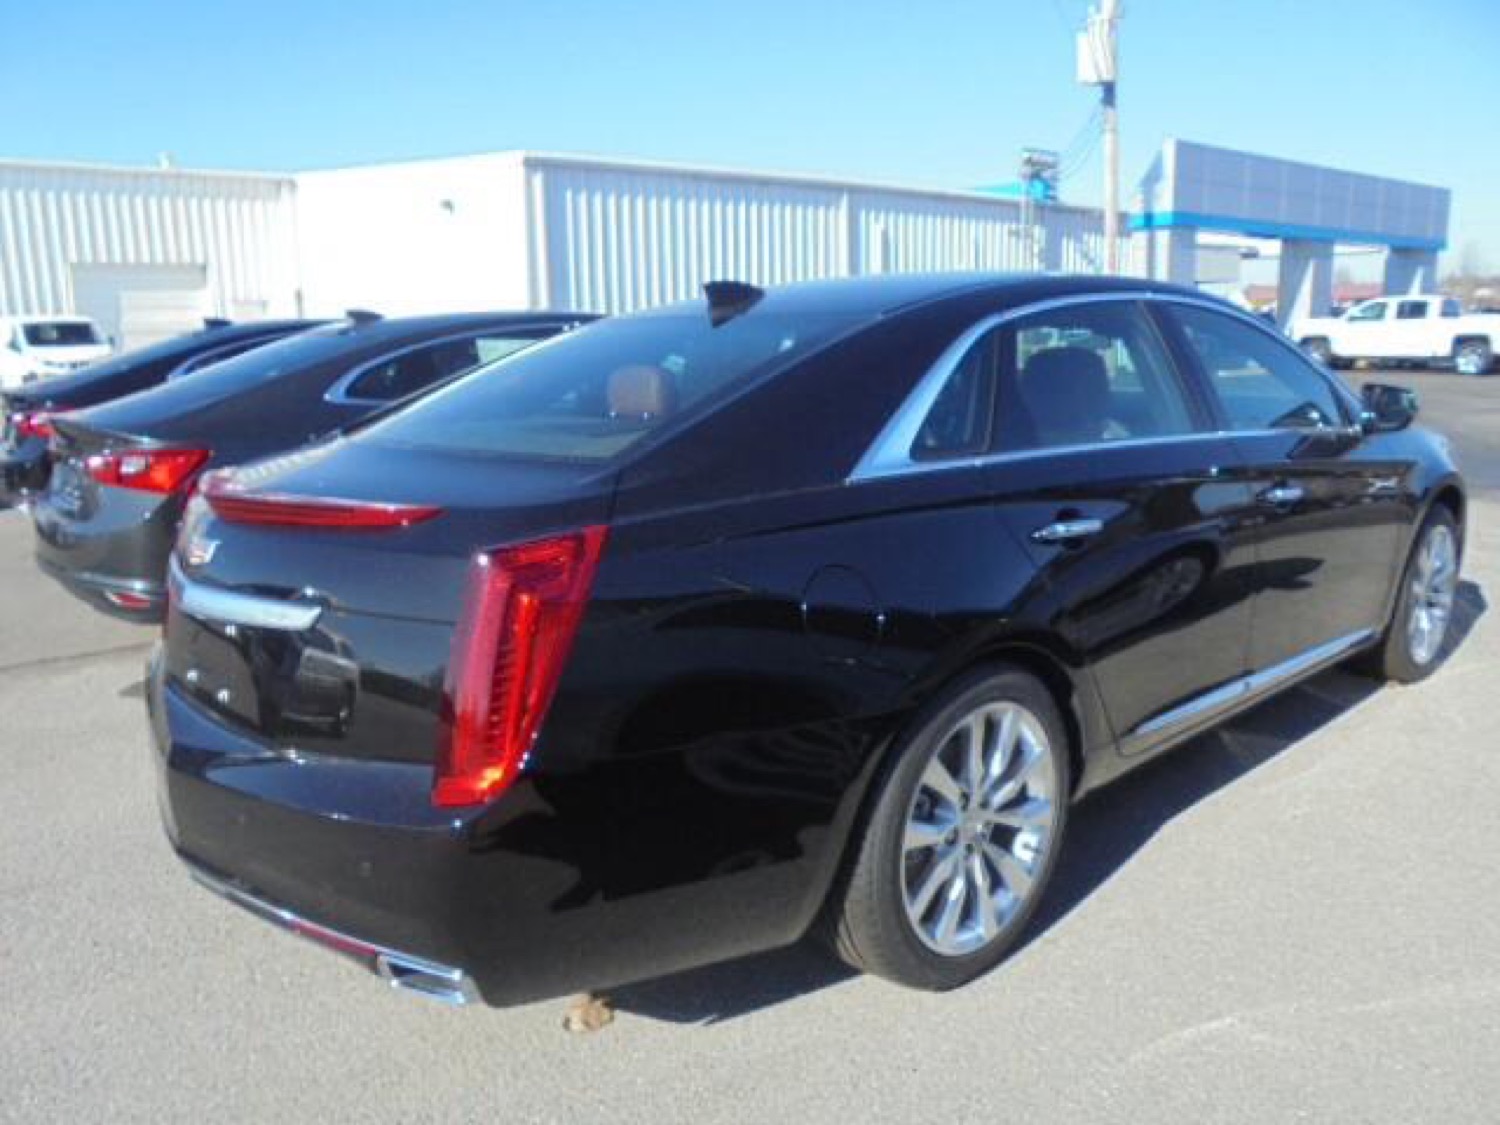 New 2017 Cadillac XTS Is Still Up For Grabs in Missouri | GM Authority